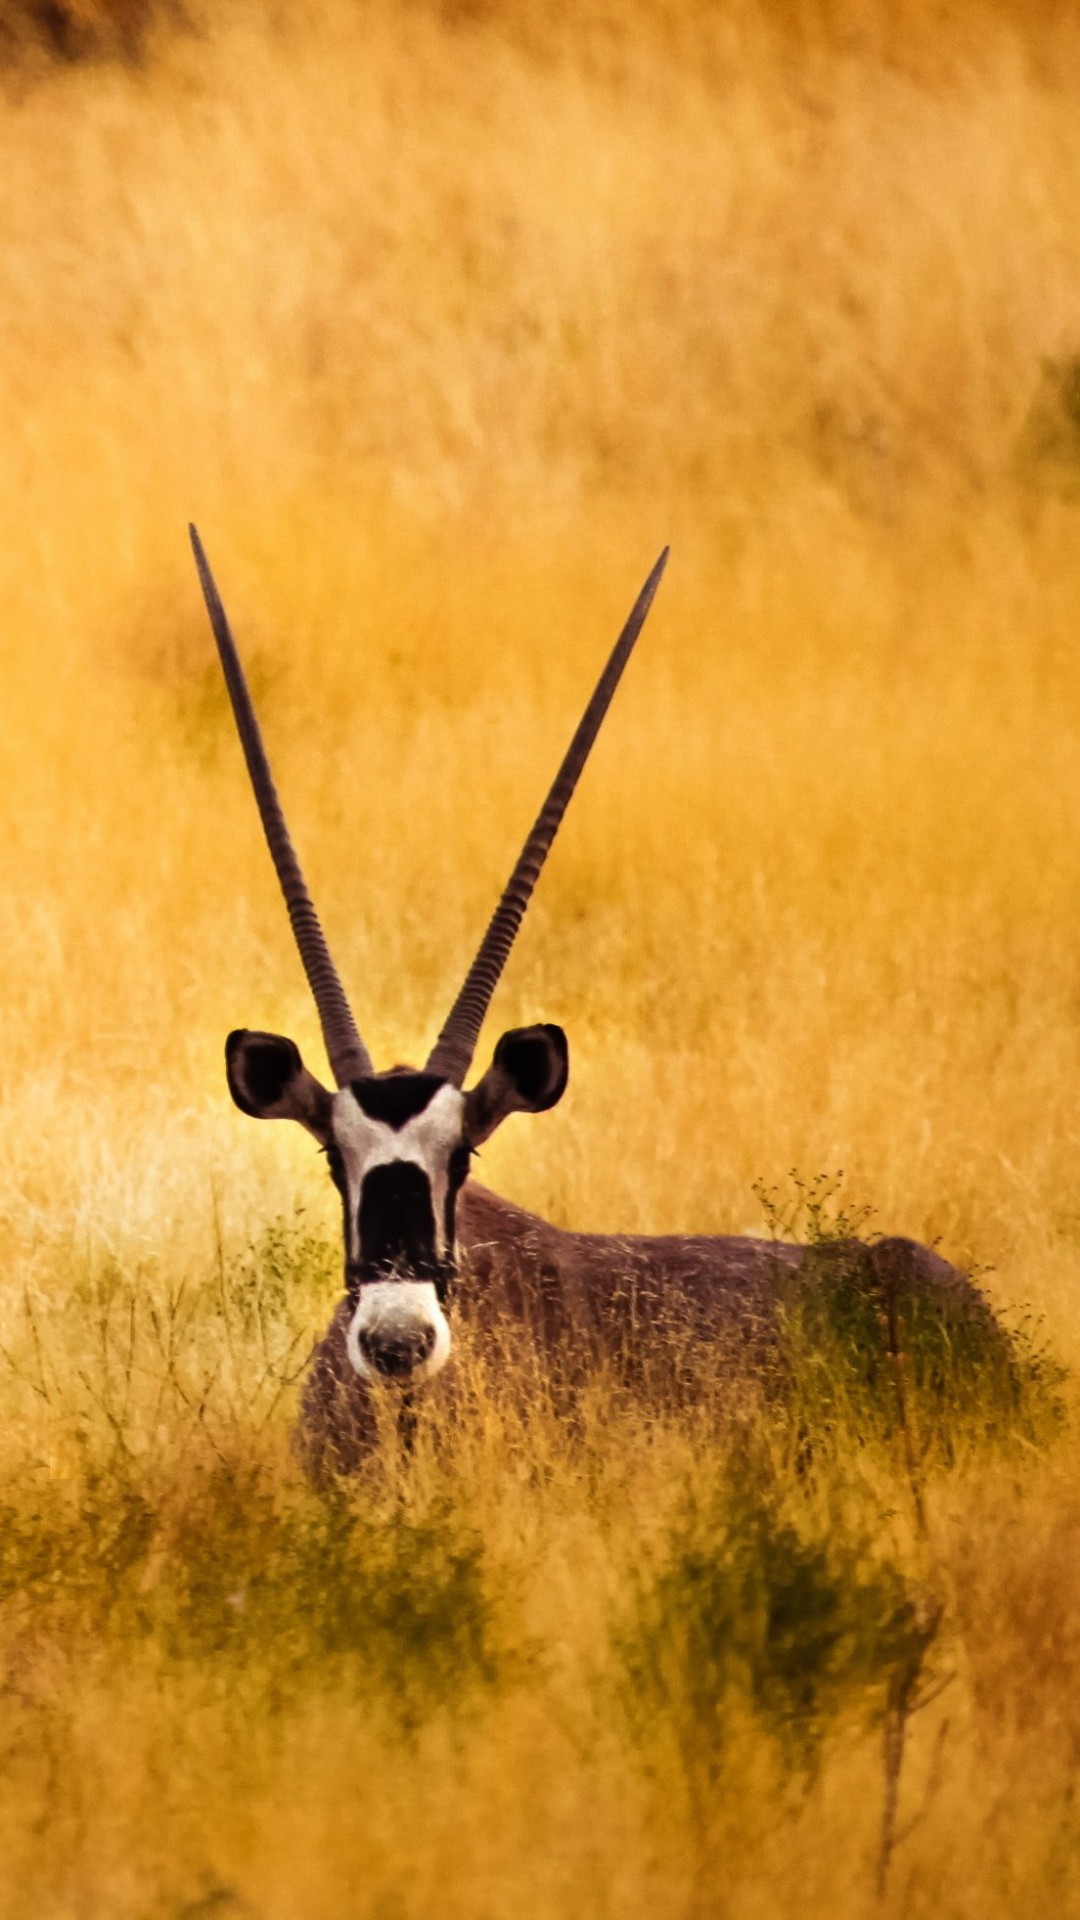 Antelope In The Savanna Wallpaper for SONY Xperia Z2